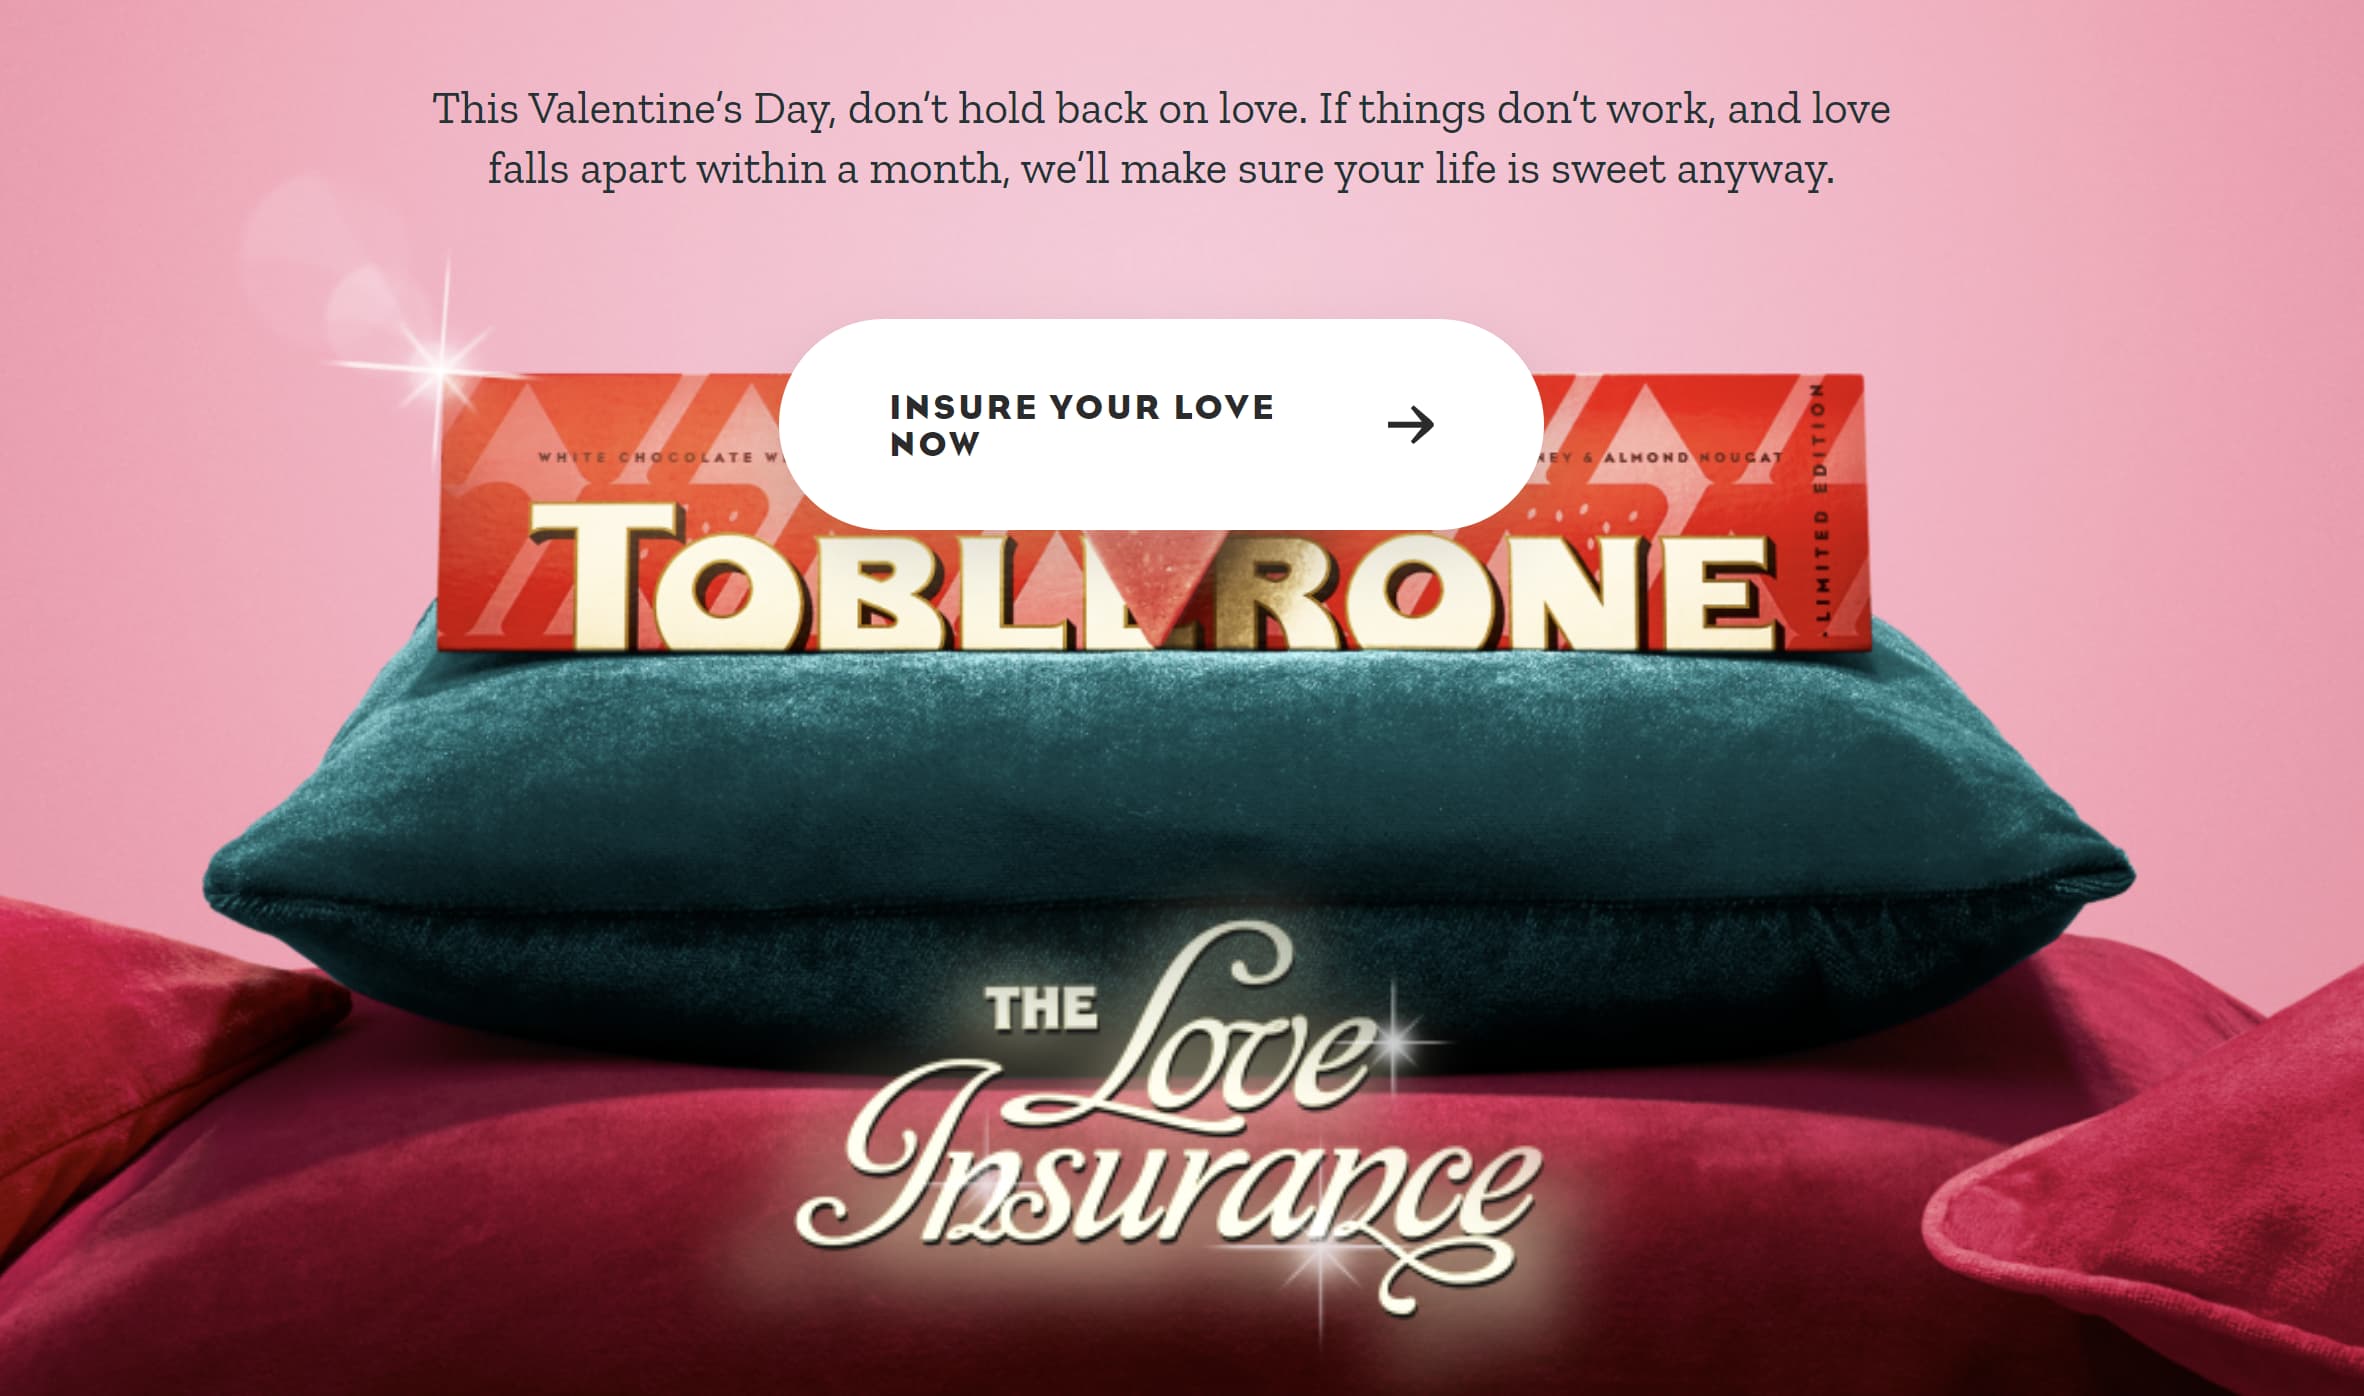 Toblerone  Give a thoughtful gift this Valentine's Day